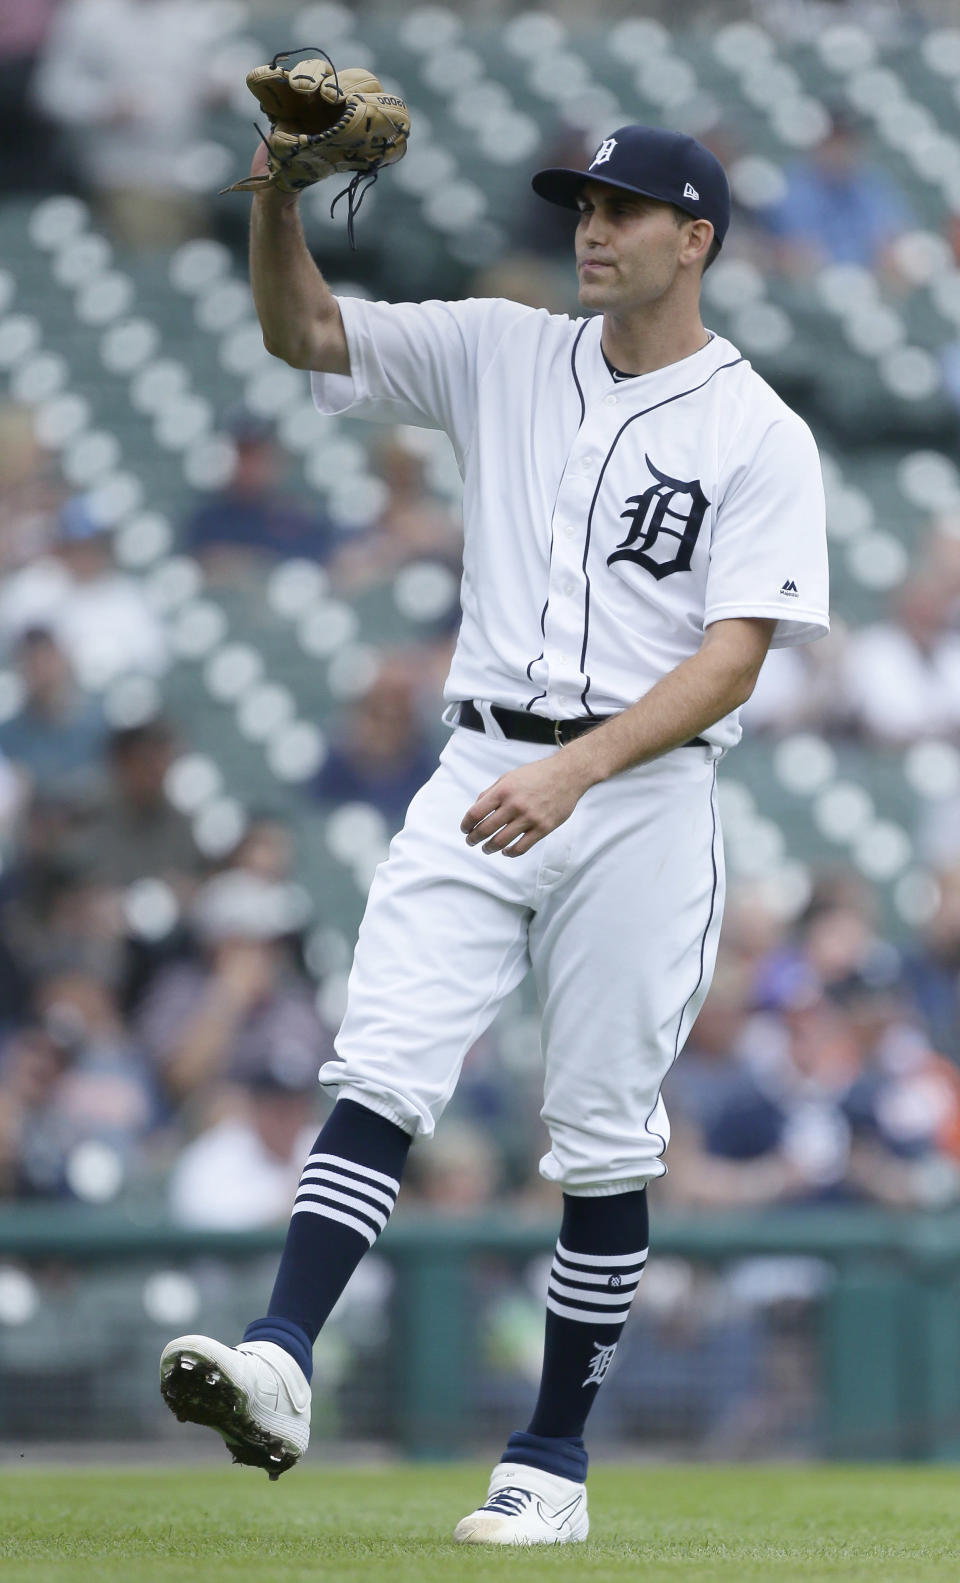 Detroit Tigers starting pitcher Matthew Boyd (48) reacts after giving up a two-run home run to New York Yankees' Luke Voit during the first inning of the first game of a baseball doubleheader, Thursday, Sept. 12, 2019, in Detroit. (AP Photo/Duane Burleson)